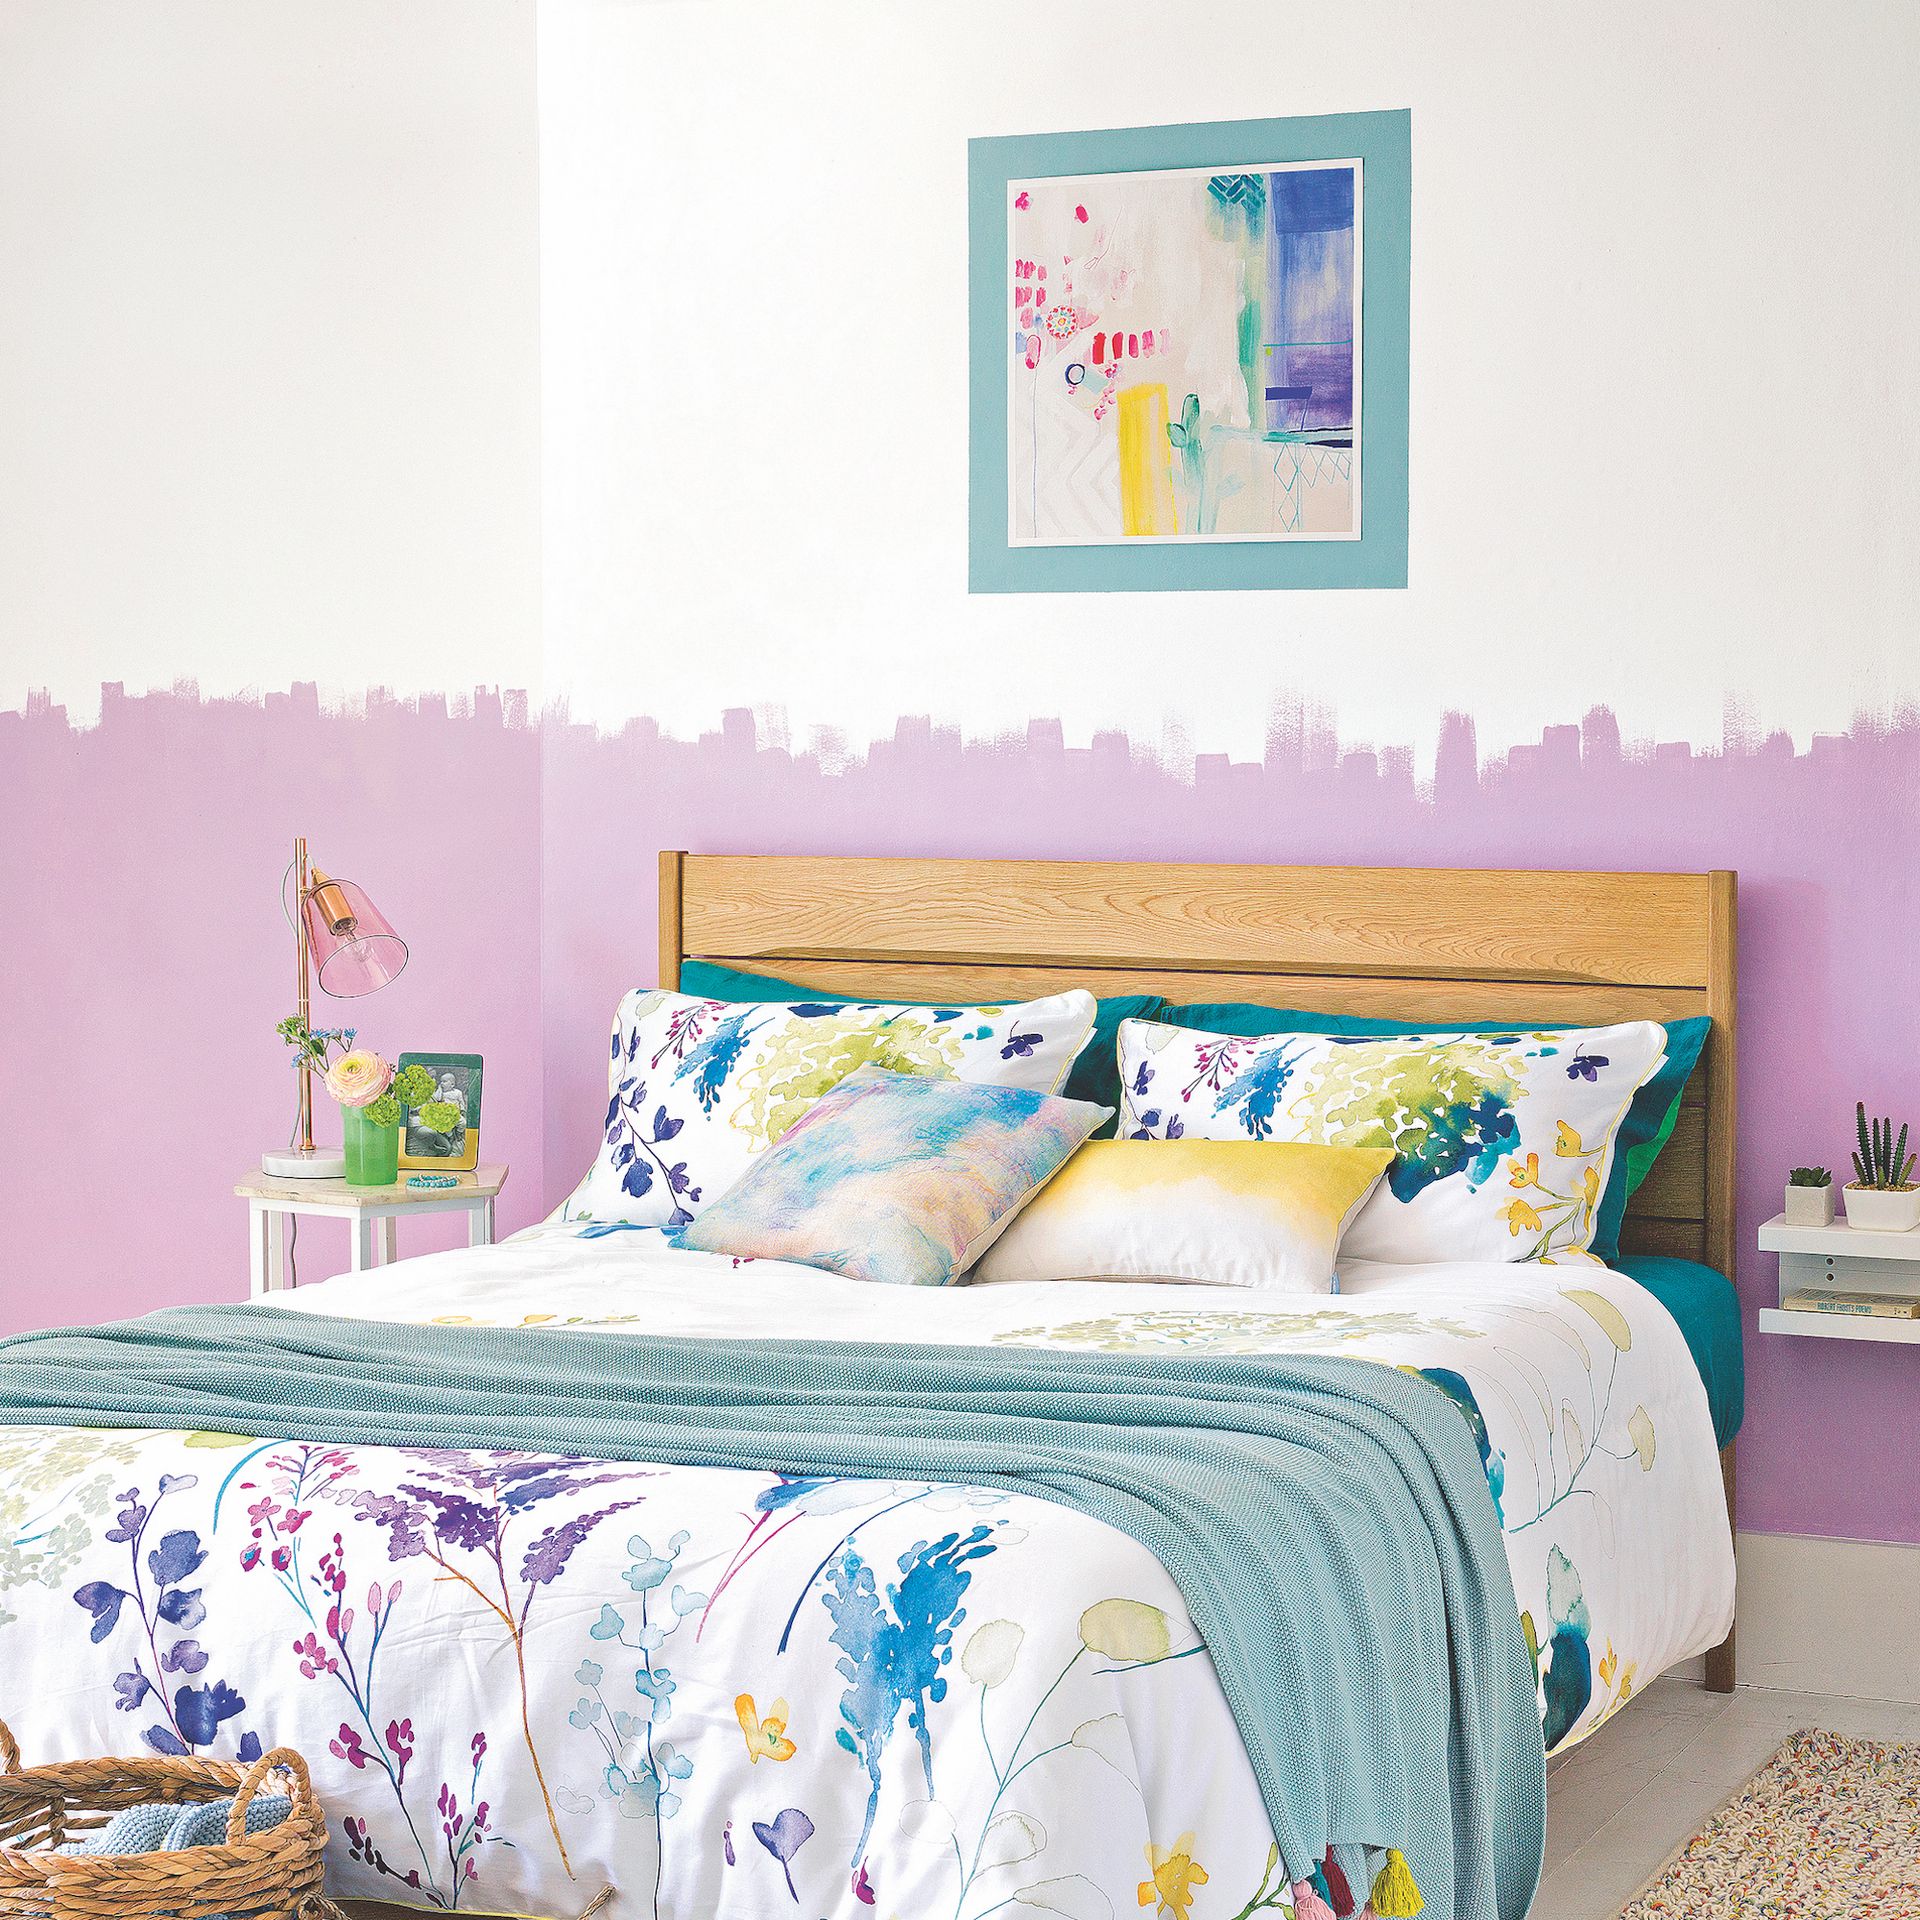 Bedroom paint ideas that will inspire you to rethink your space